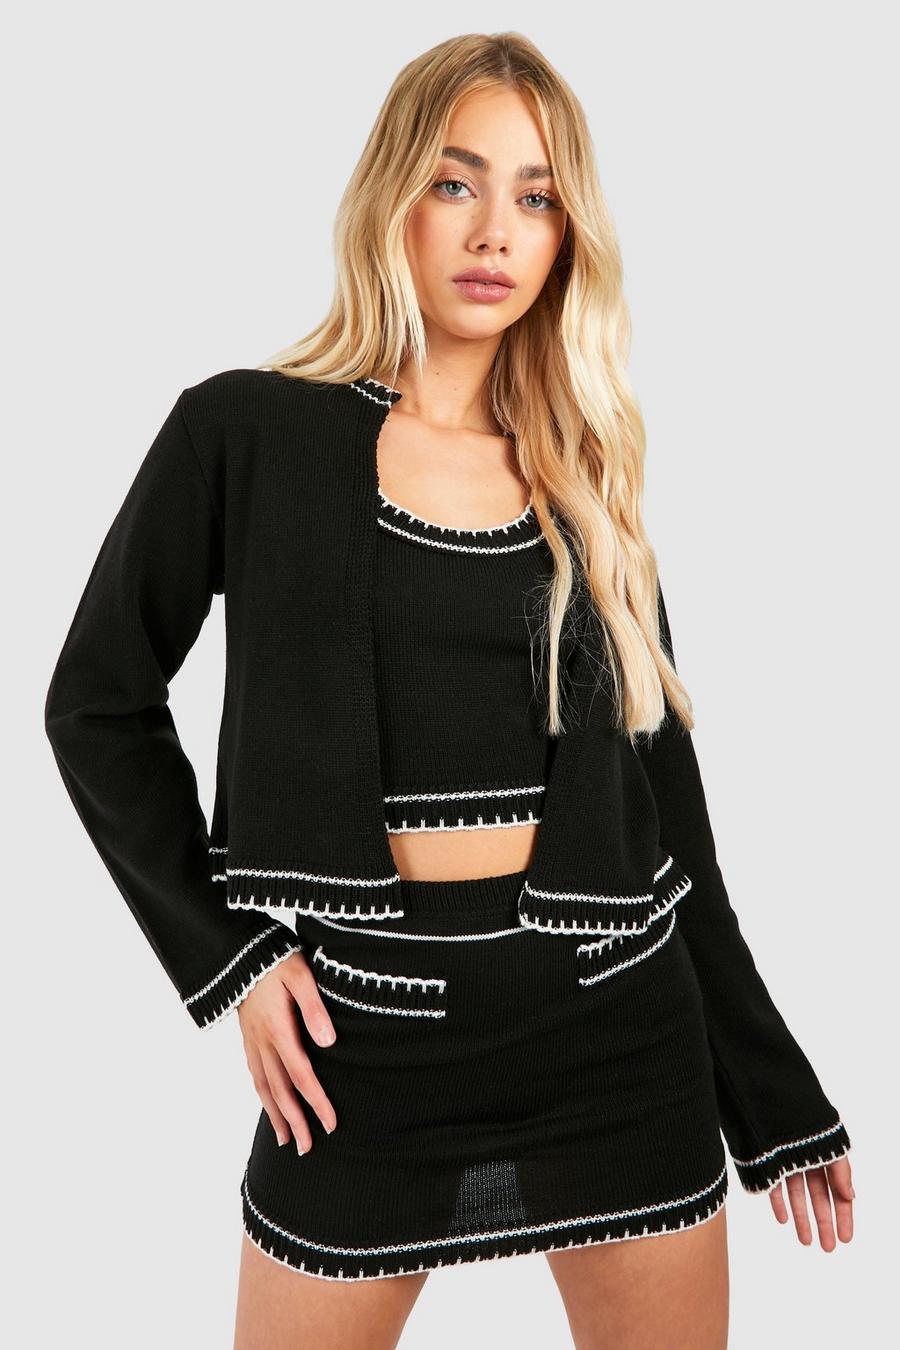 Black Contrast Stitch 3 Piece Knitted Cardigan, Crop Top And Mini Skirt Set